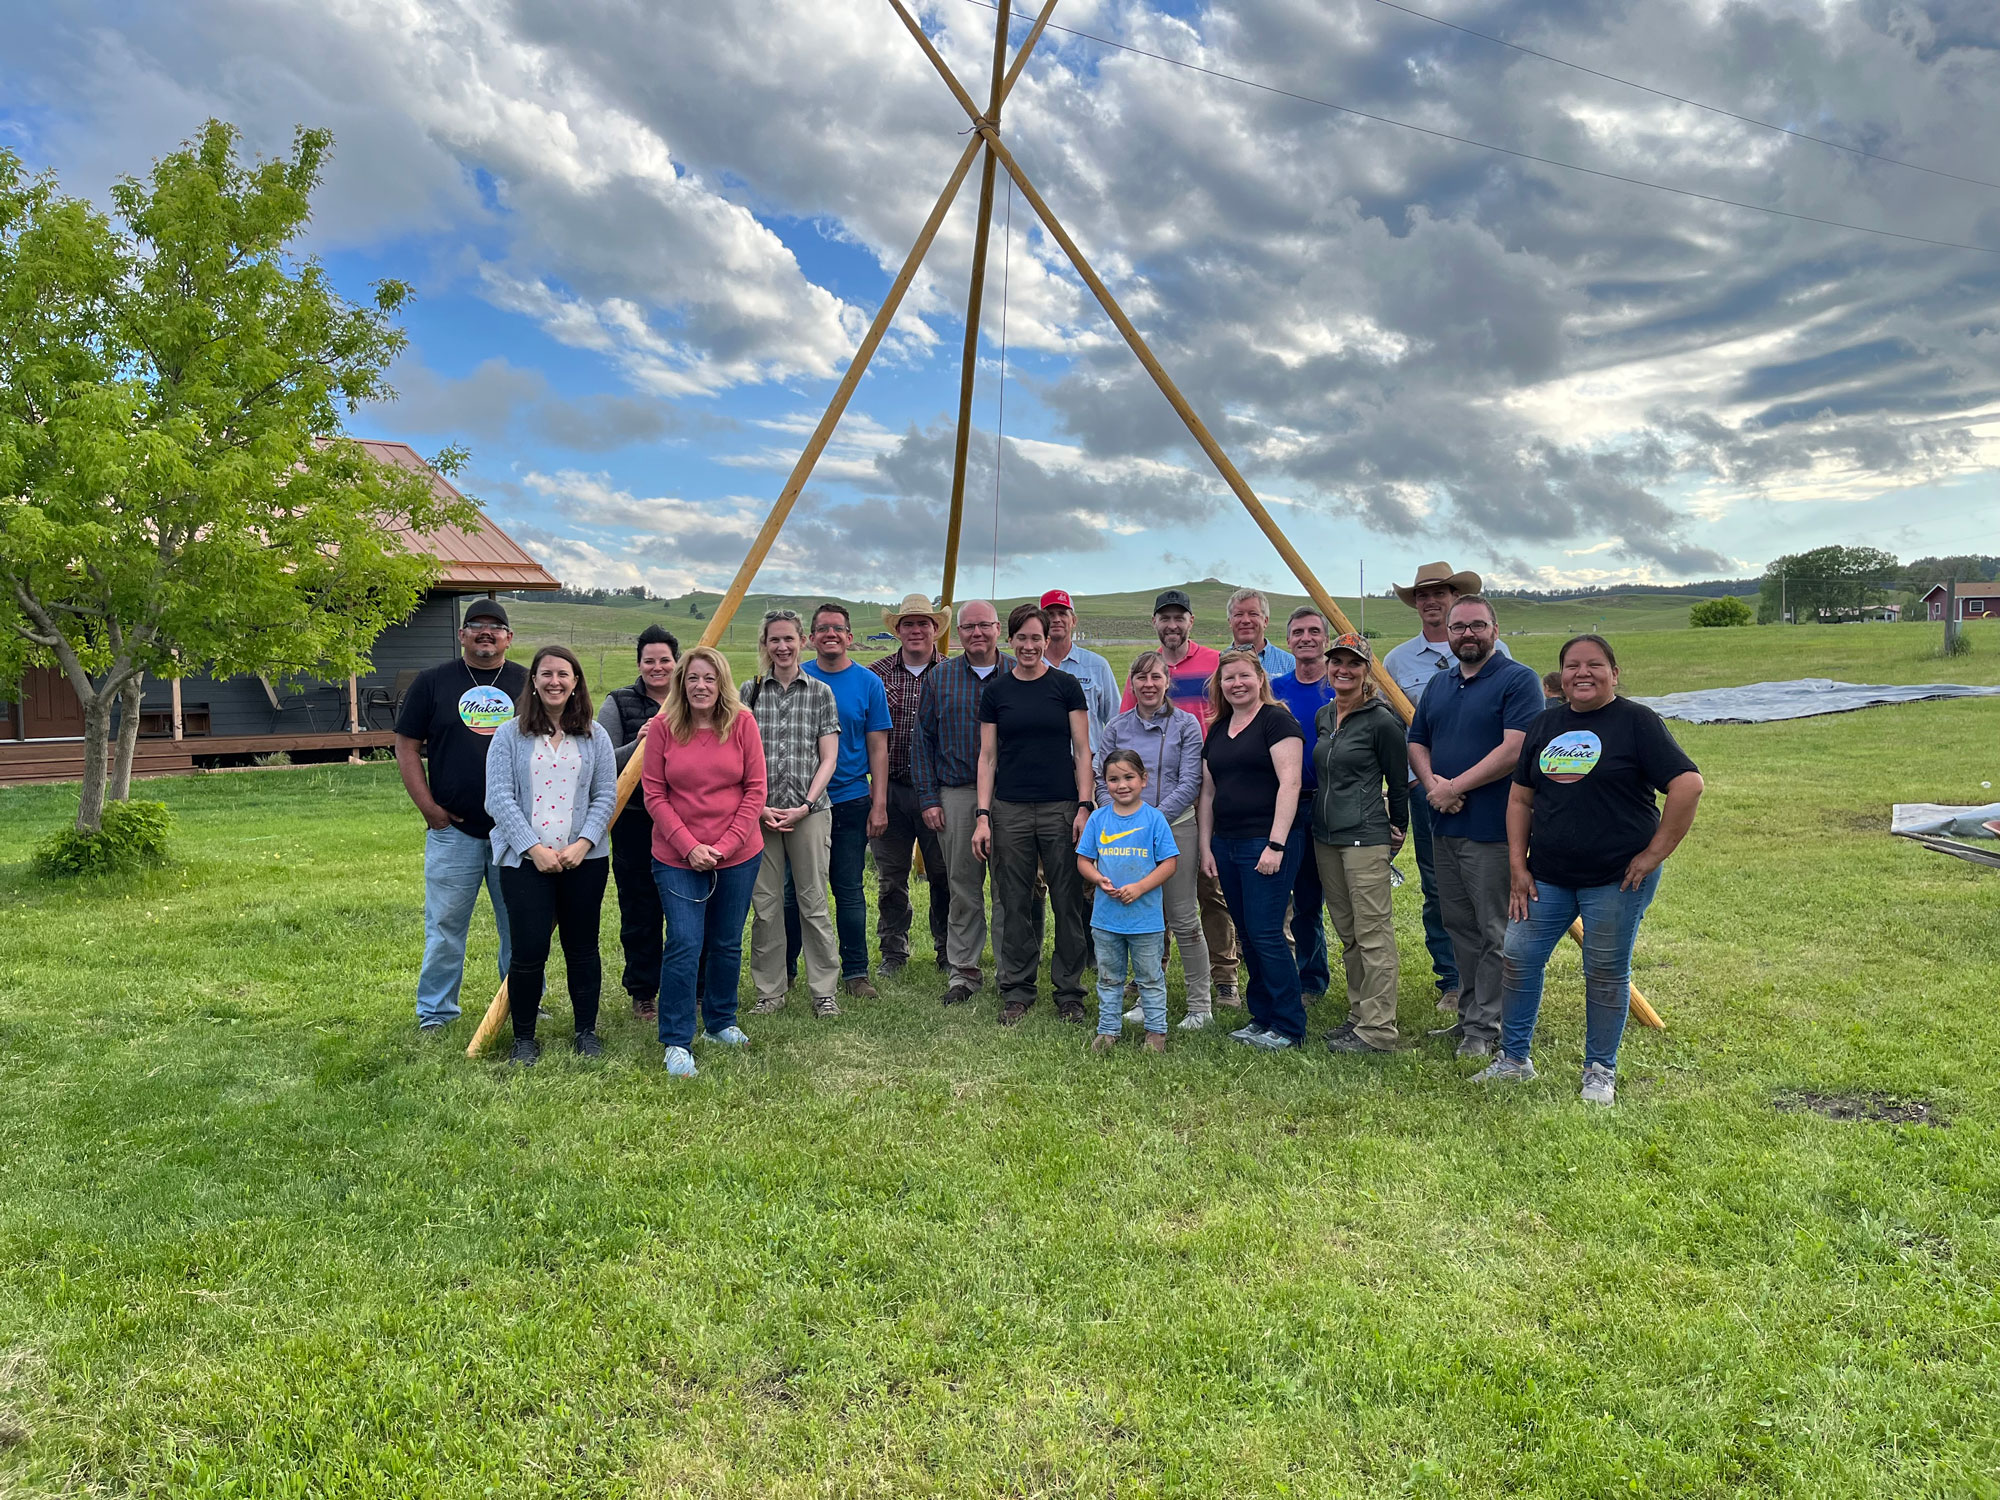 FNS Senior Policy Advisor Ali Hard participated in a traditional buffalo harvest with members of the Oglala Sioux tribe, FNS Mountain Plains Region staff, and staff from the USDA Food Safety and Inspection Service